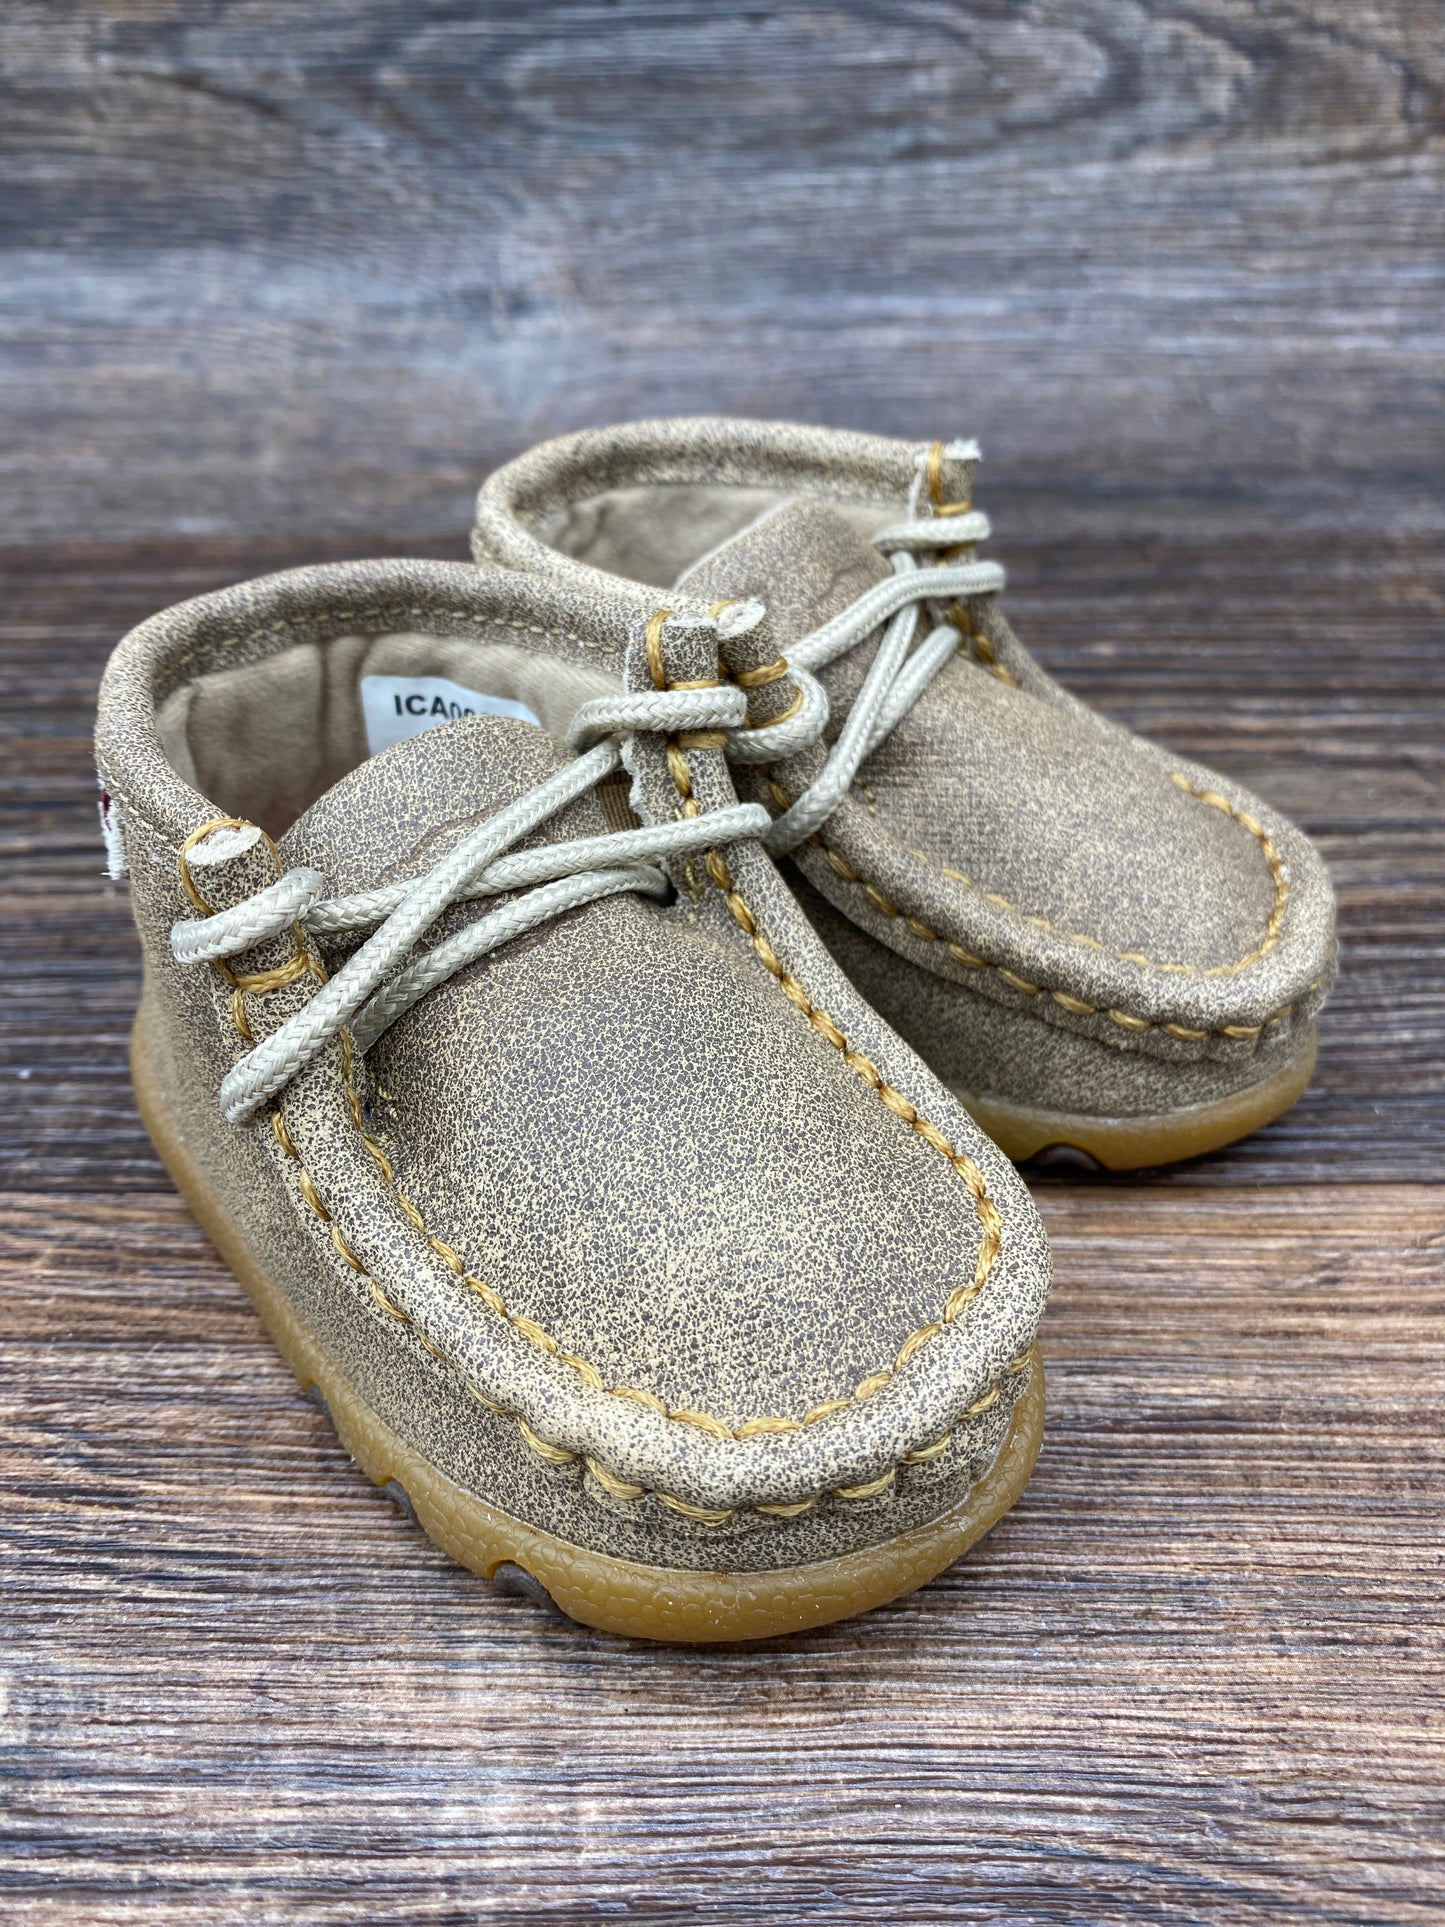 ica0005 Infant and Toddler Lace Up Driving Moc by Twisted X